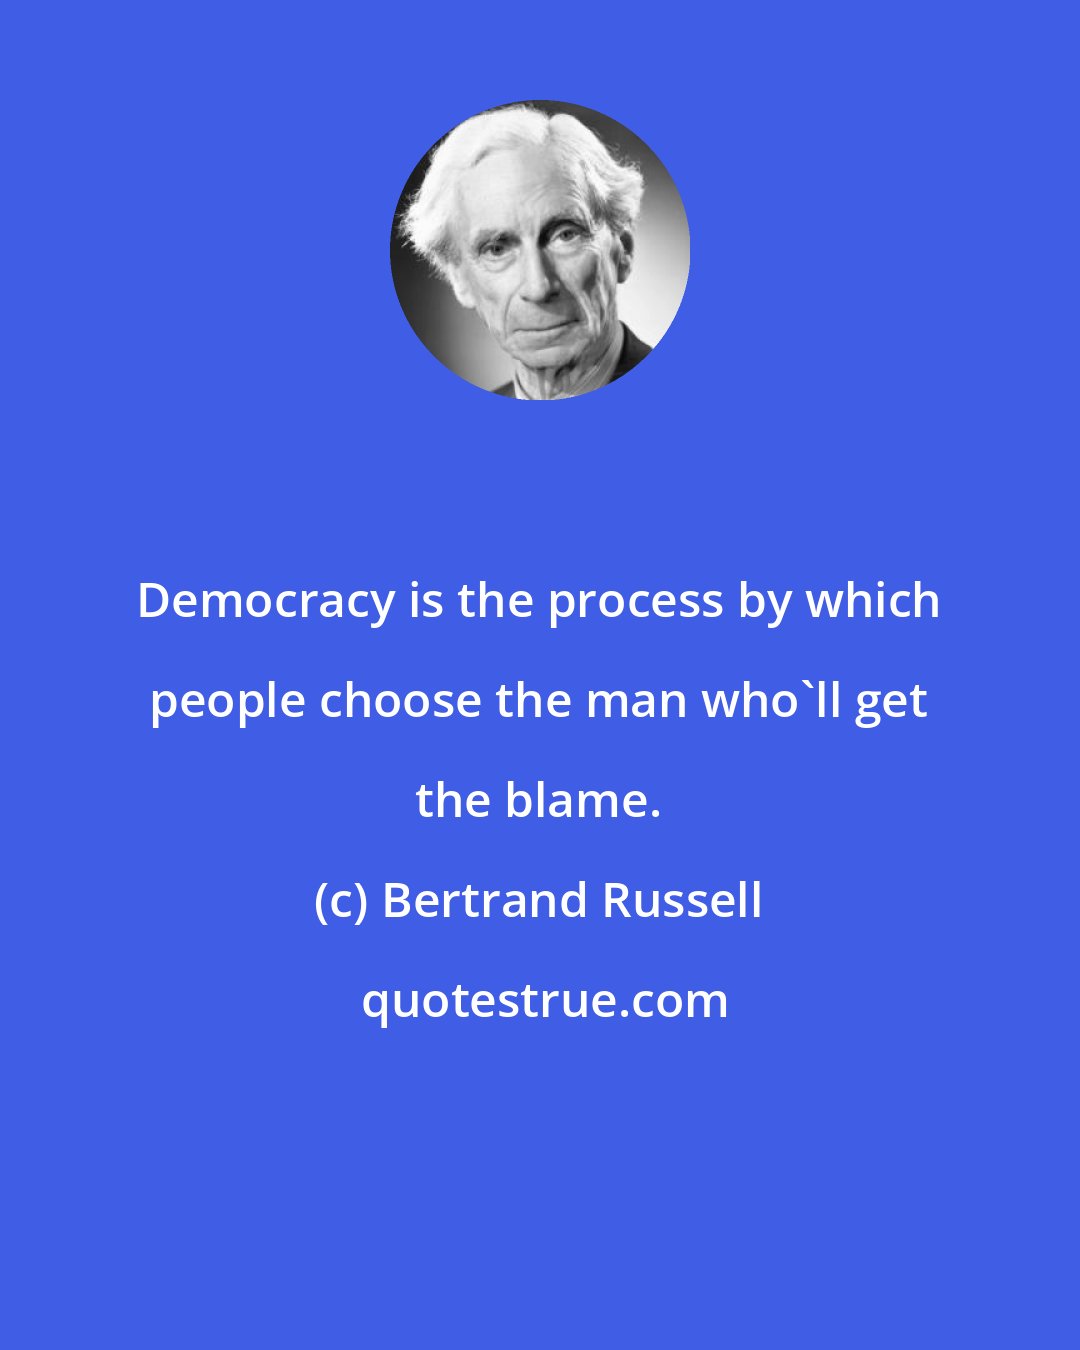 Bertrand Russell: Democracy is the process by which people choose the man who'll get the blame.